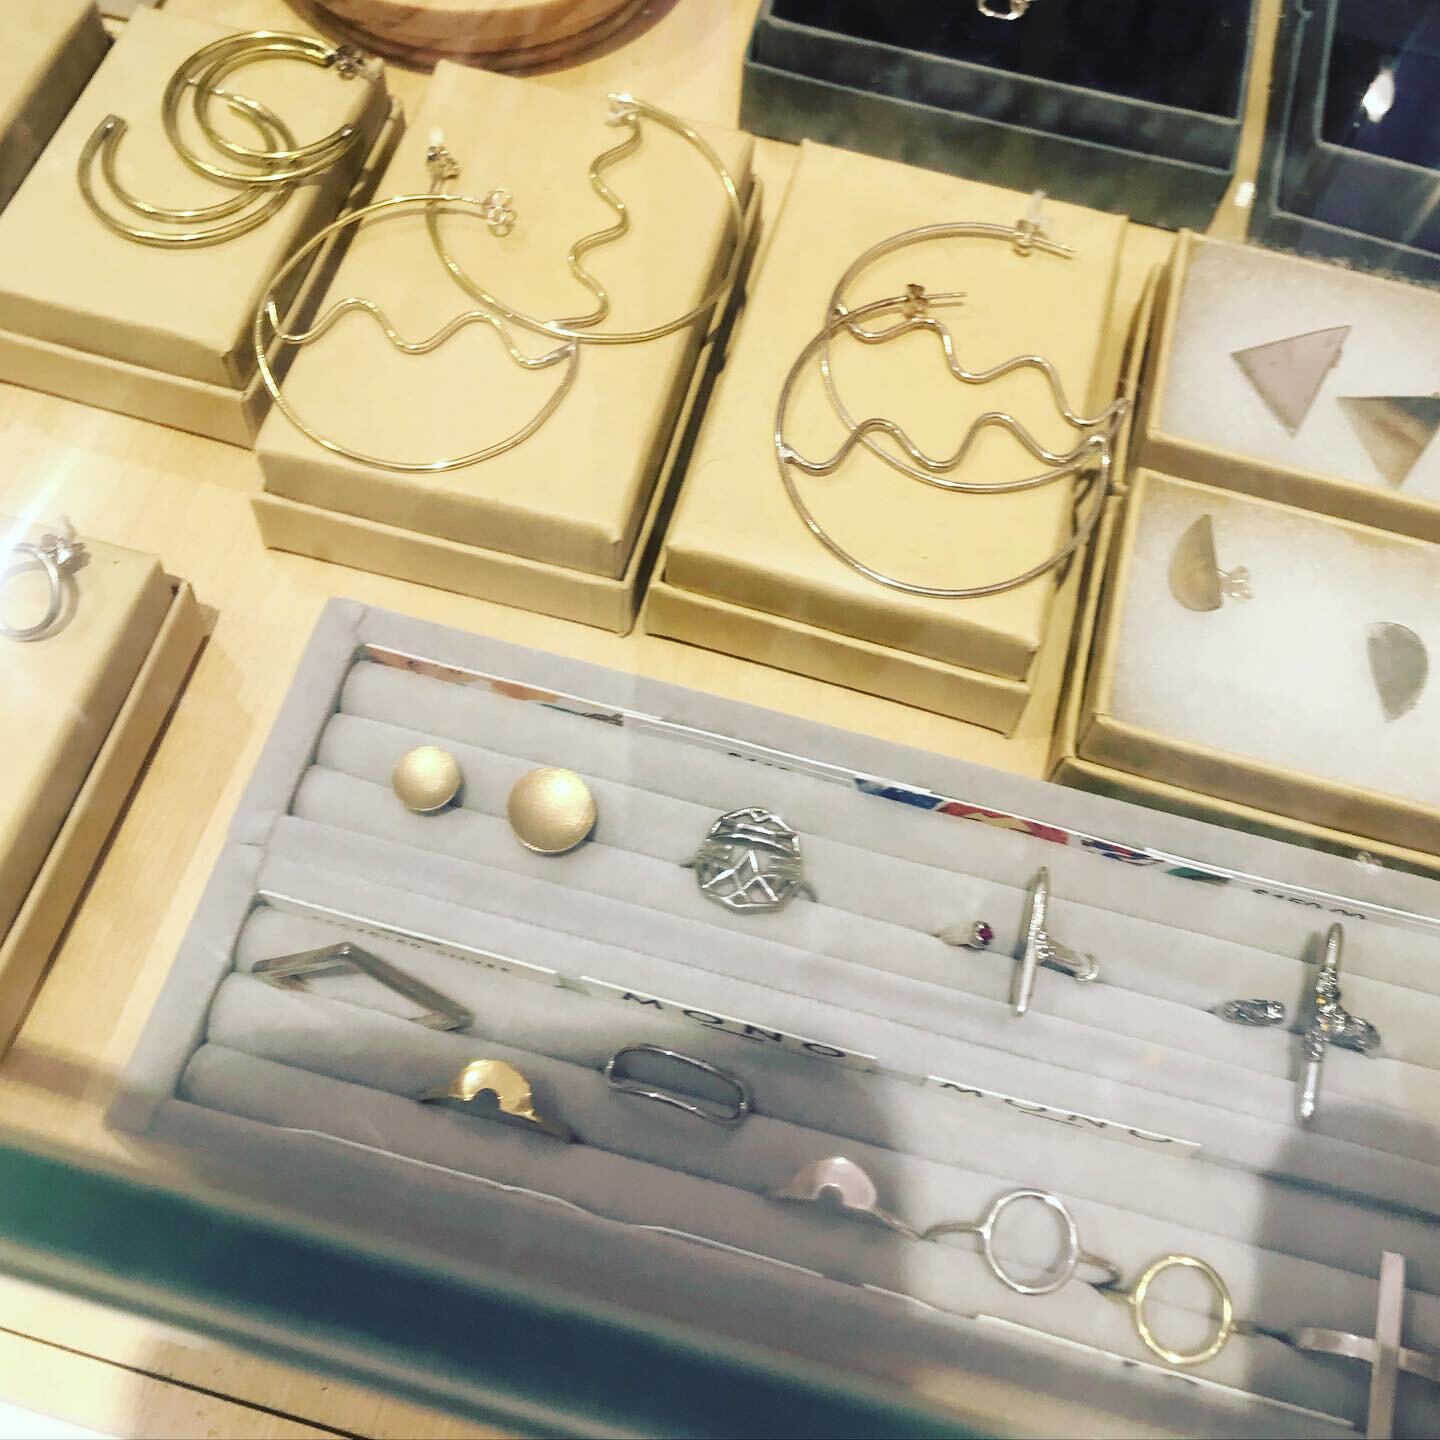 Thrilled to now have my range of 3D printed precious metal jewellery at @qvwc_shop alongside the work of other amazing makers, including @michkayoga ❤️
#forwomenbywomen #maker #3dprintedjewelry #makersgonnamake